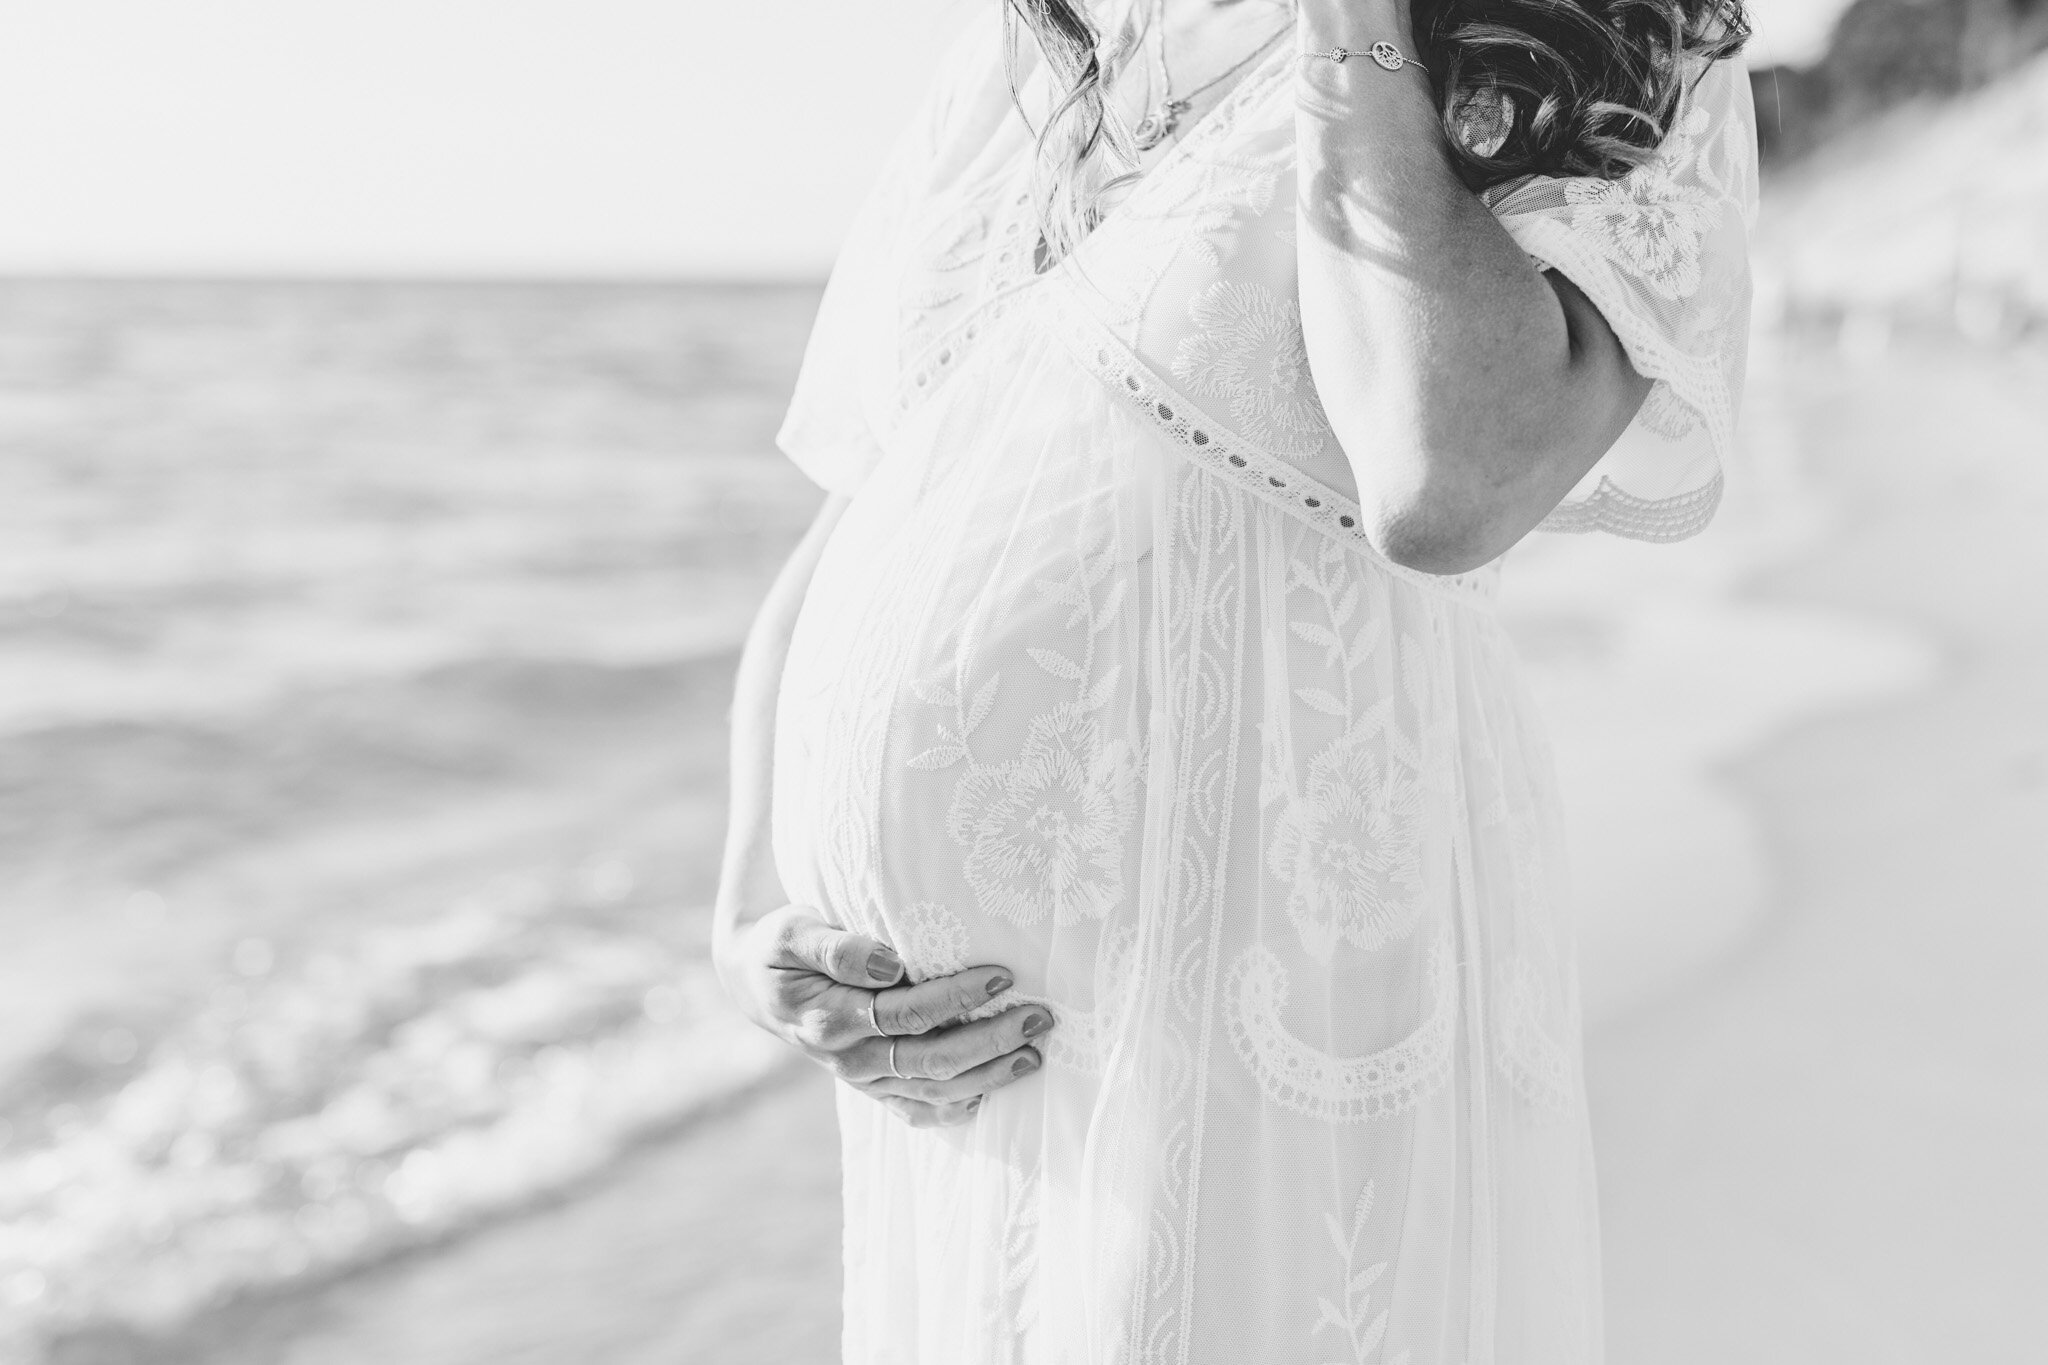 Golden Hour Maternity Session on Lake Michigan | Light &amp; Airy Michigan Lifestyle Photographer